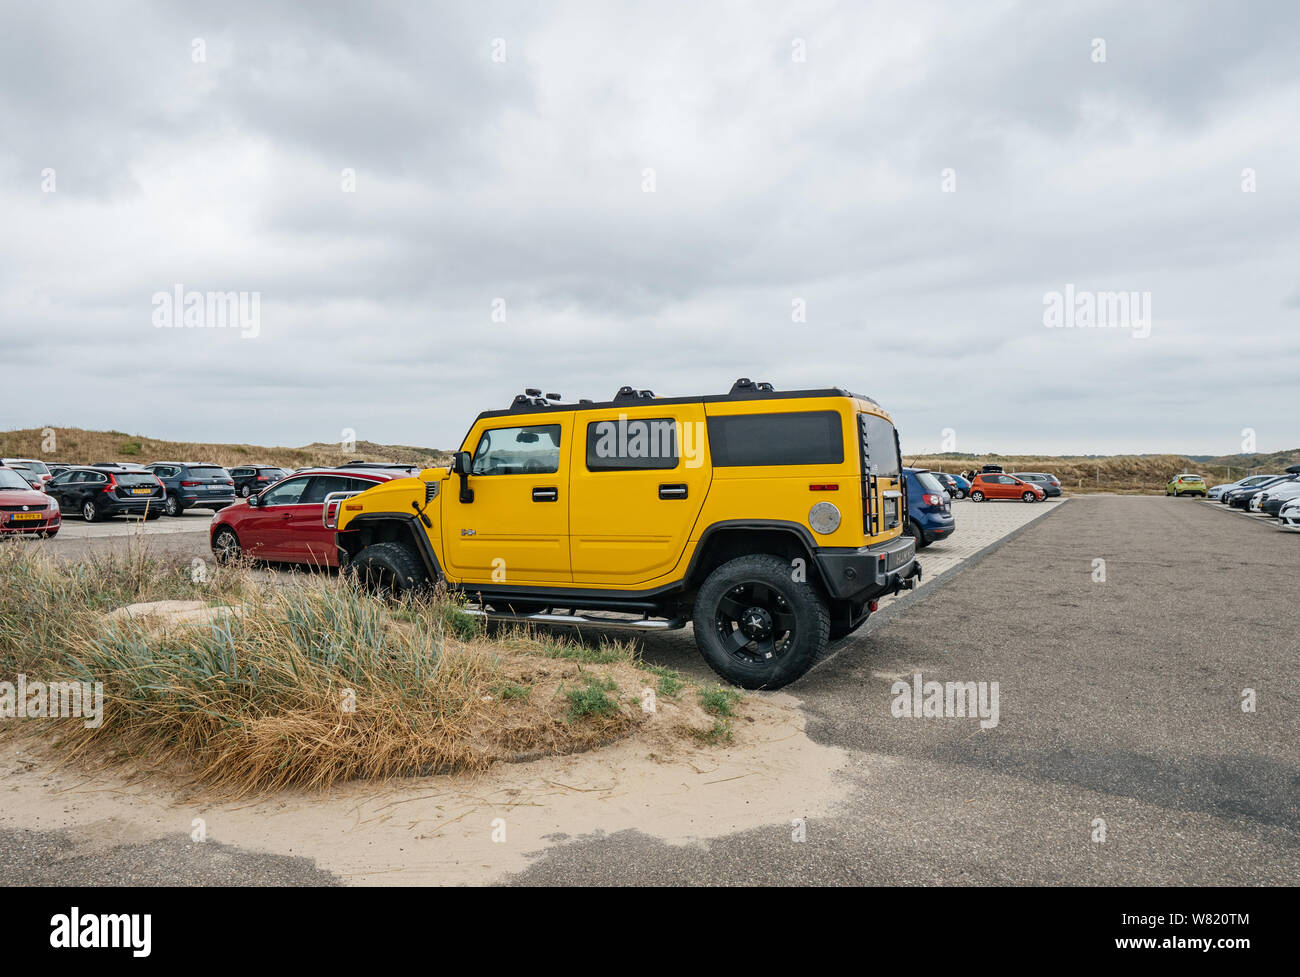 Overveen, Netherlands - Aug 16, 2019: Side view of luxury yellow hummer large SUV parked in the sand covered Dutch paid parking Stock Photo